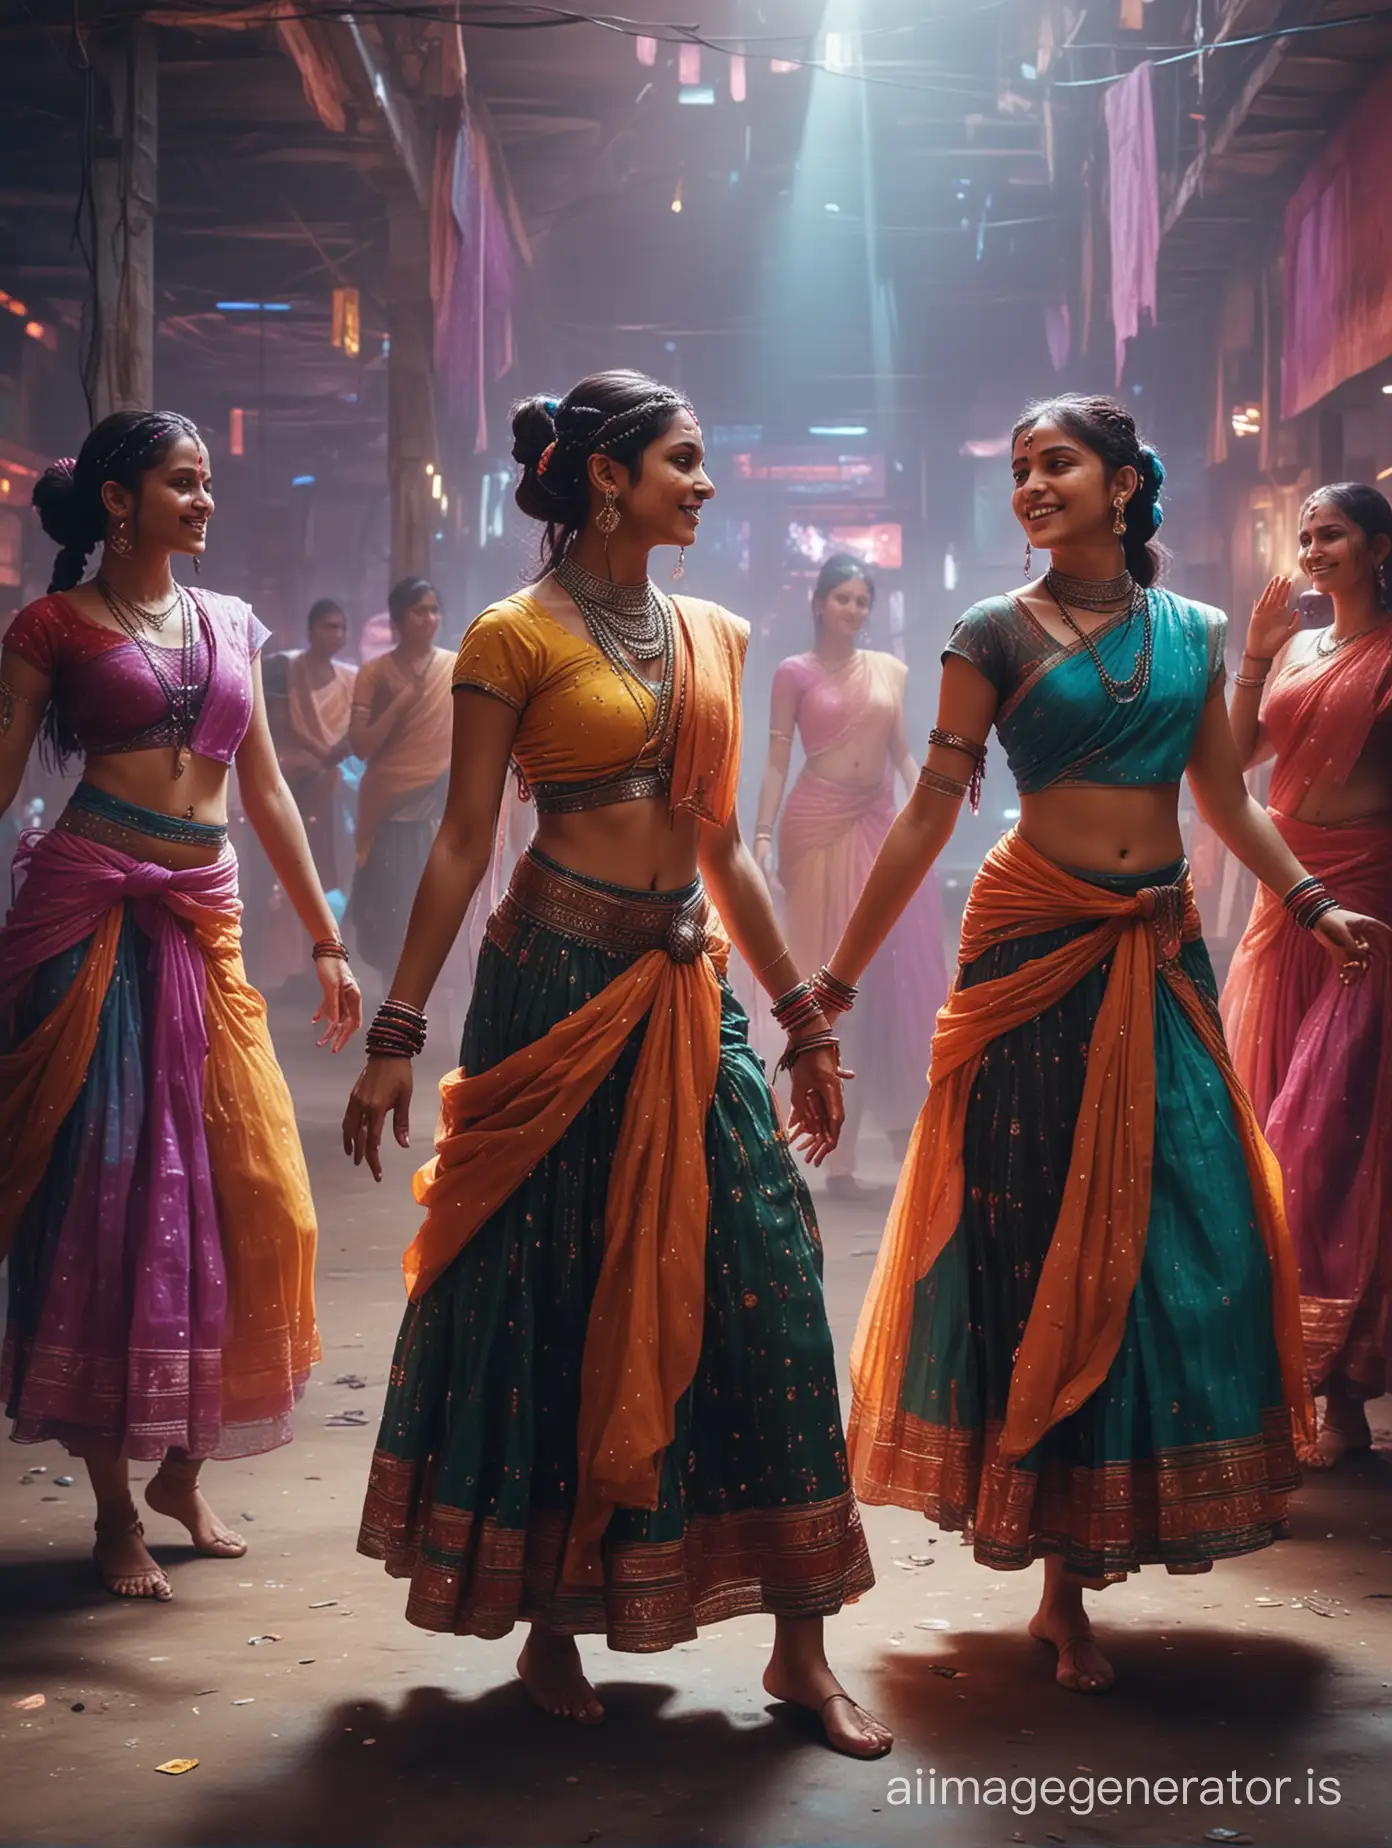 Cyberpunk. Future. India. Girls dance in Indian dresses. Lots of colors and light. Everyone is happy